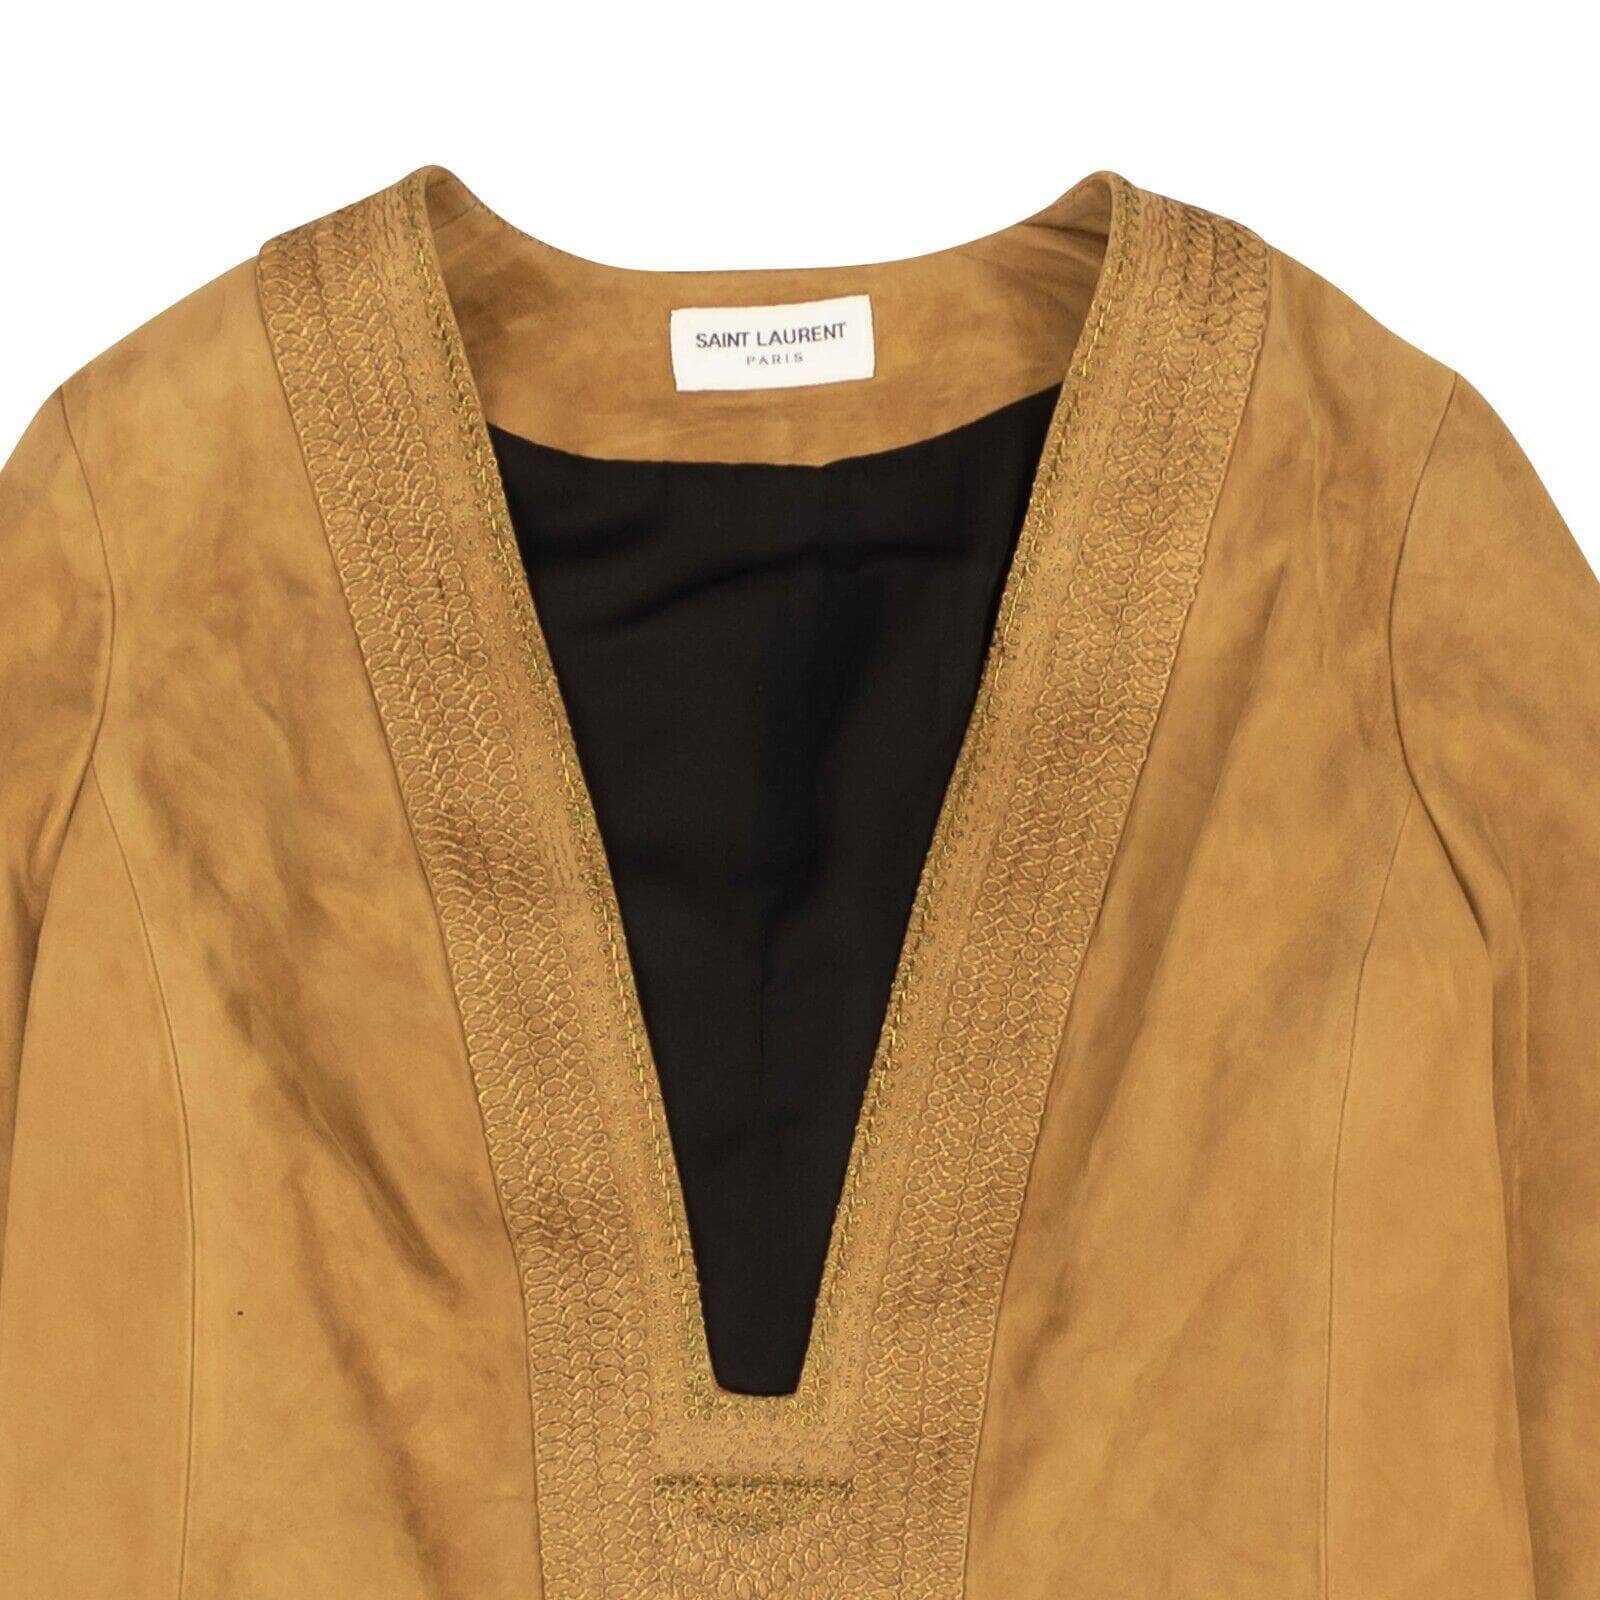 Saint Laurent channelenable-all, chicmi, couponcollection, gender-womens, main-clothing, over-5000, saint-laurent, size-34, size-36, size-38, size-40, womens-blouses Brown Kaftan Suede Top